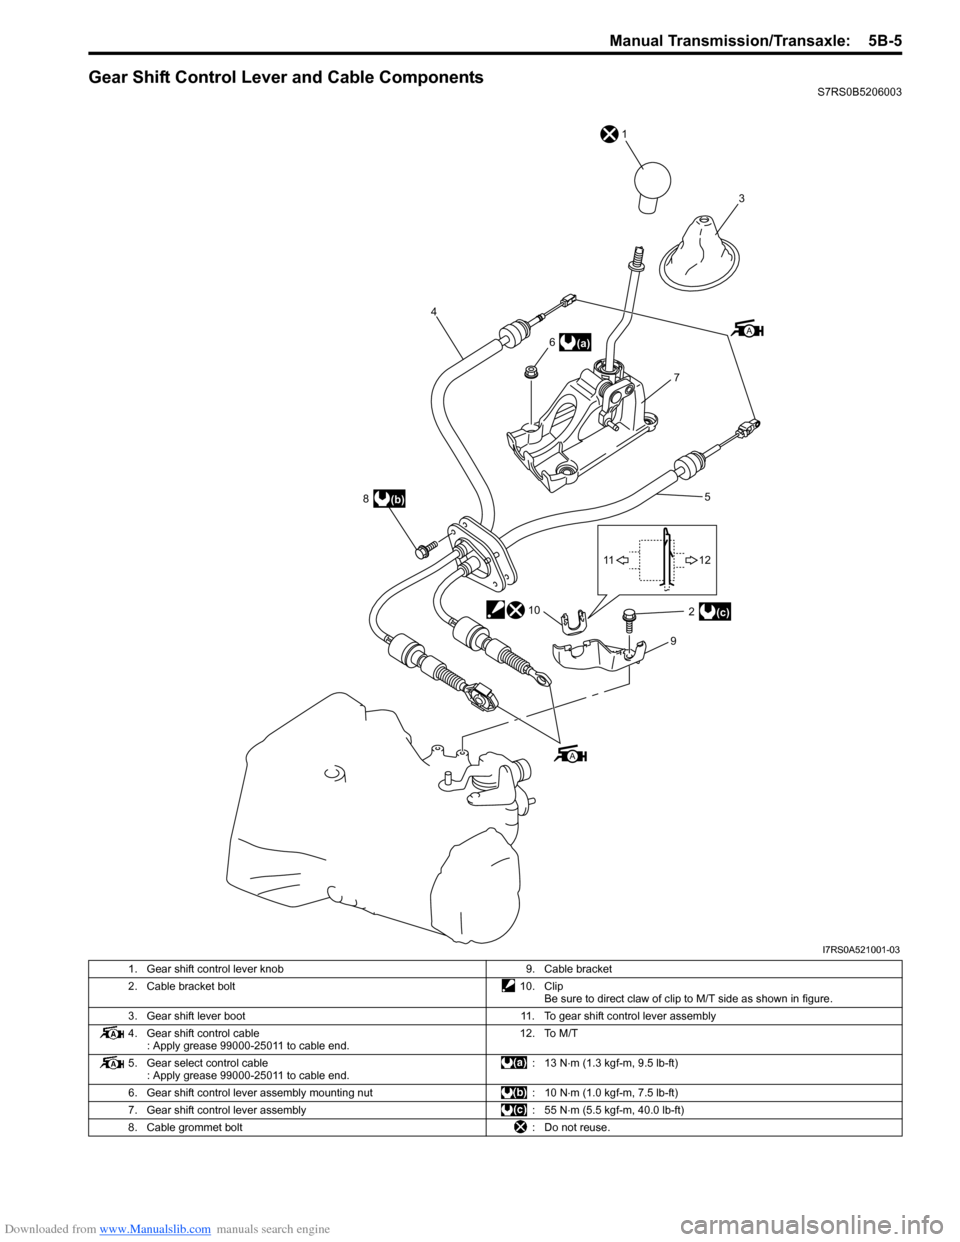 SUZUKI SWIFT 2006 2.G Service Workshop Manual Downloaded from www.Manualslib.com manuals search engine Manual Transmission/Transaxle:  5B-5
Gear Shift Control Lever and Cable ComponentsS7RS0B5206003
1
3
4
(a)
7
A
(b)5
A
111 2
10
(c)
9
6
8 2
I7RS0